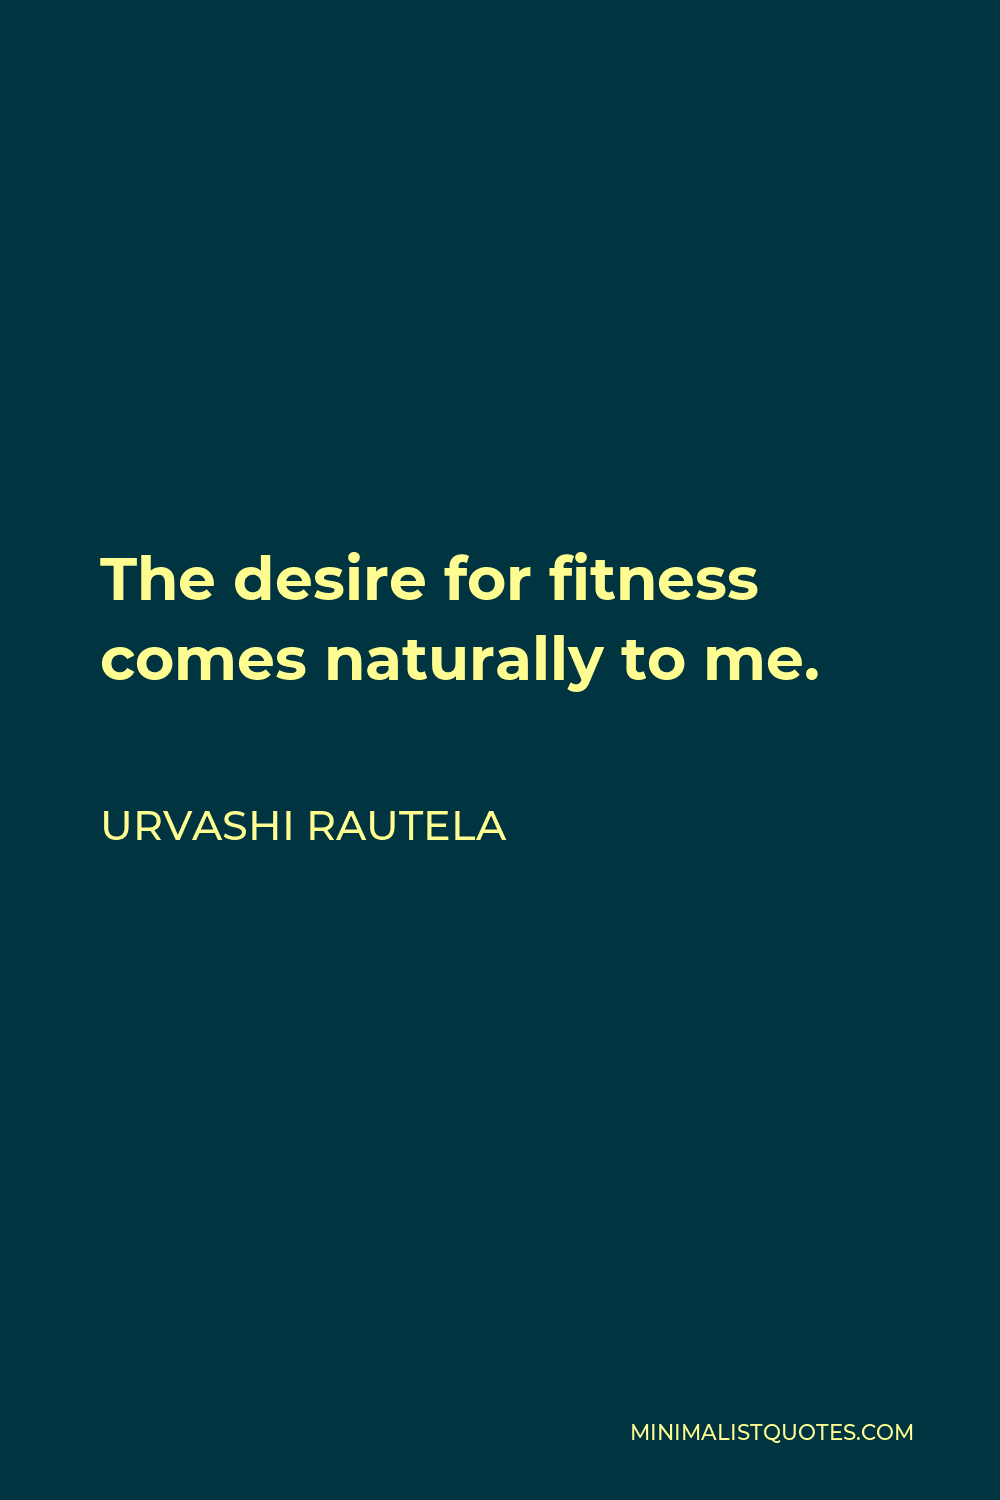 Urvashi Rautela Quote - The desire for fitness comes naturally to me.